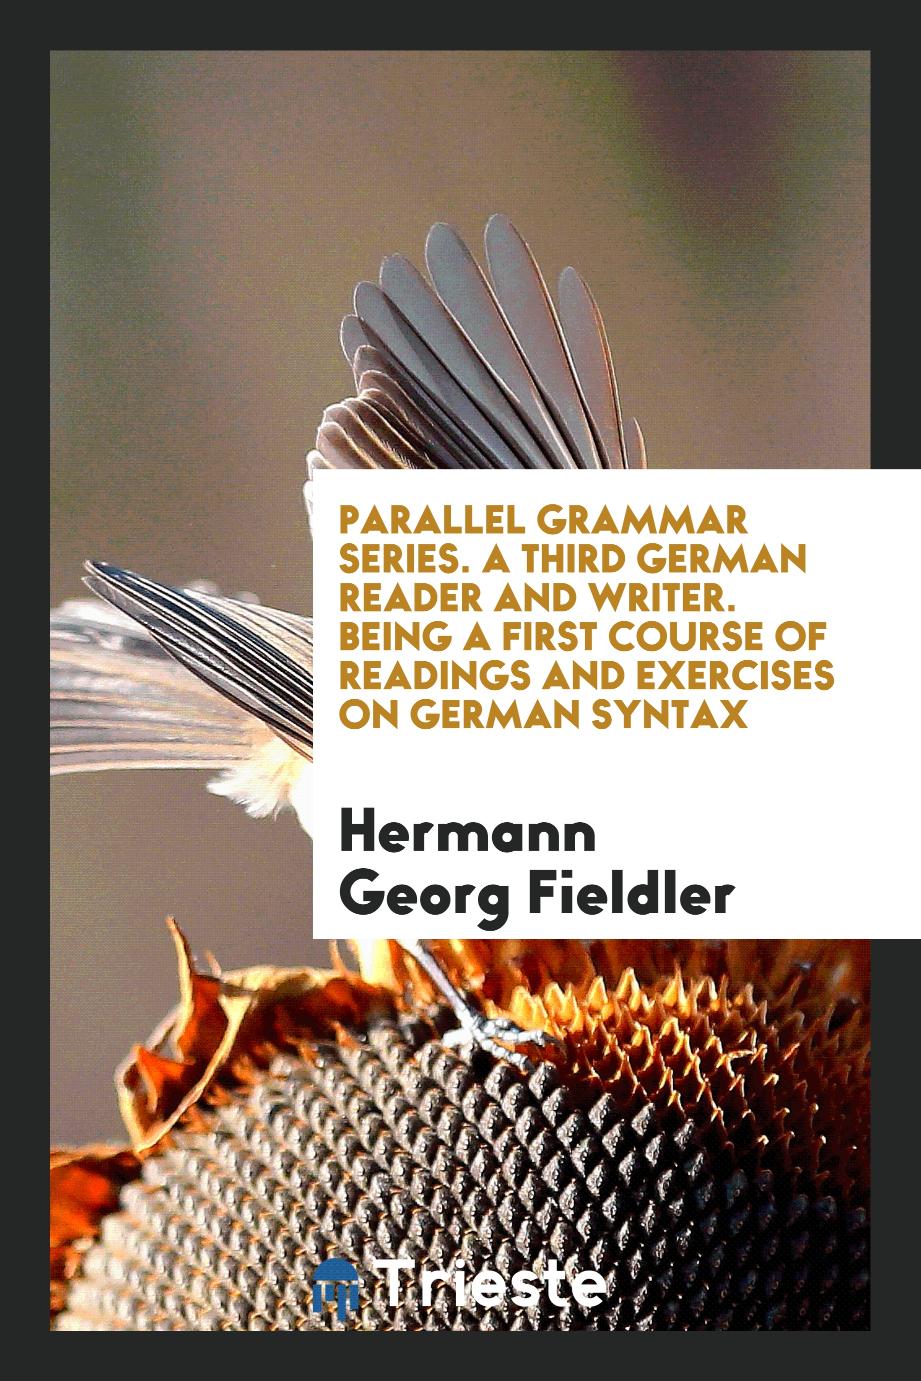 Parallel Grammar Series. A Third German Reader and Writer. Being a First Course of Readings and Exercises on German Syntax